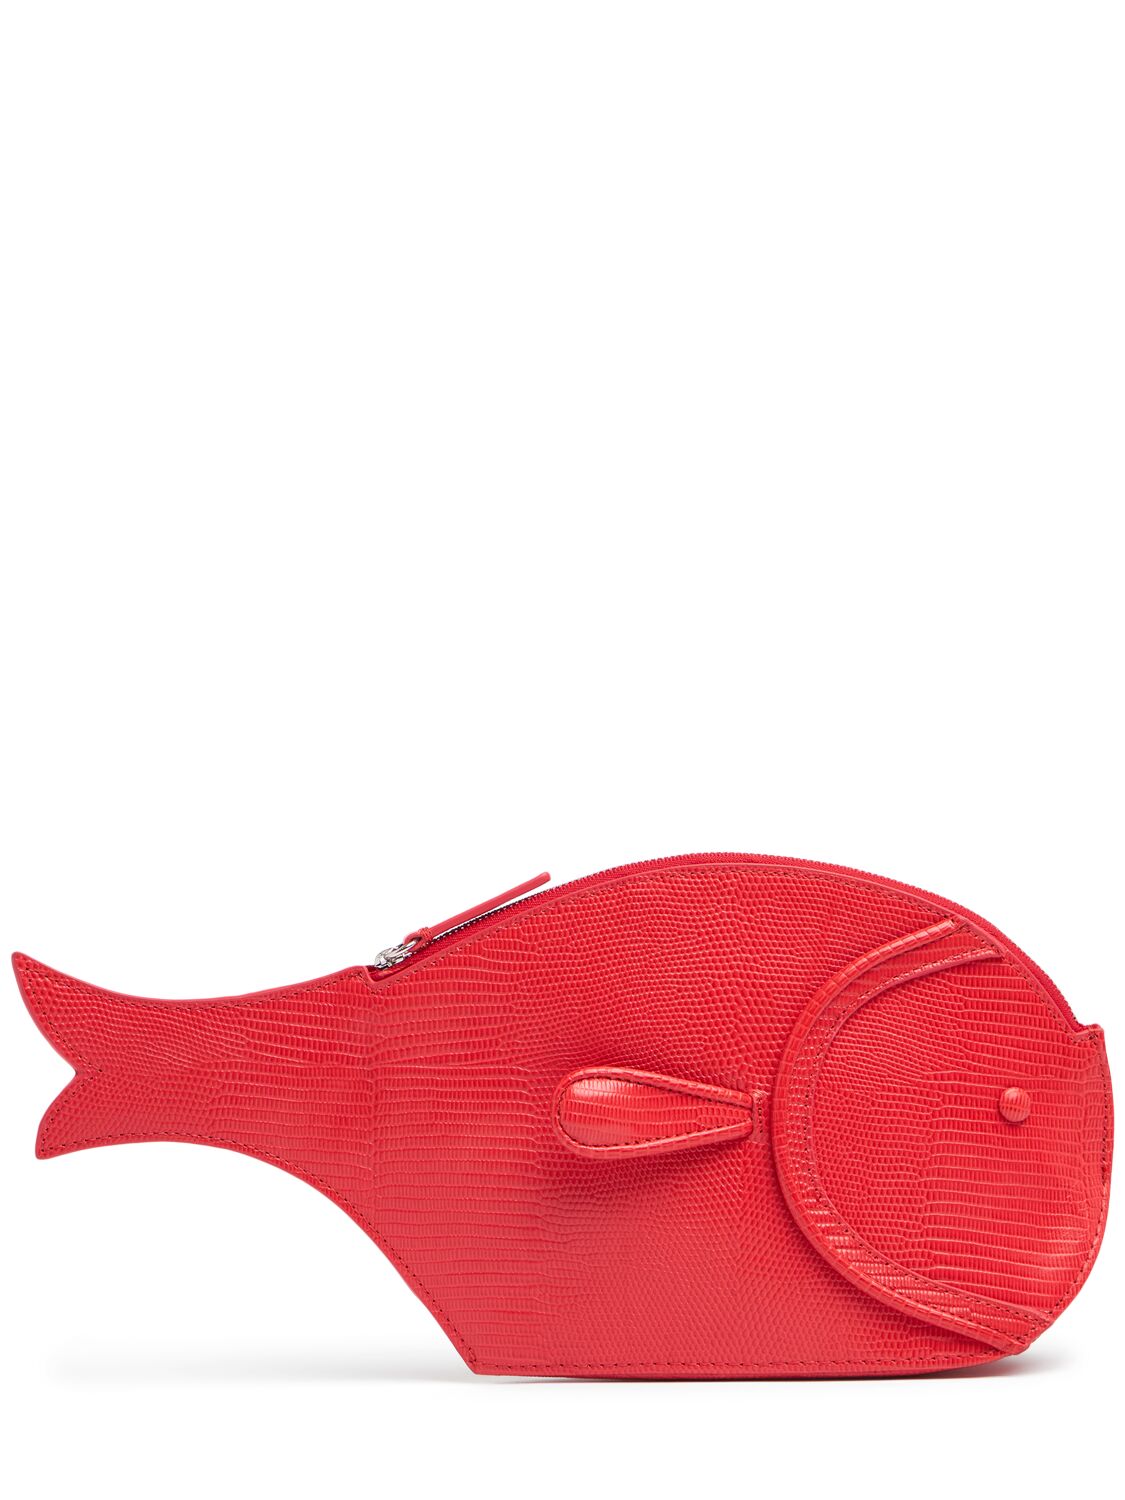 Image of Pesce Embossed Leather Clutch